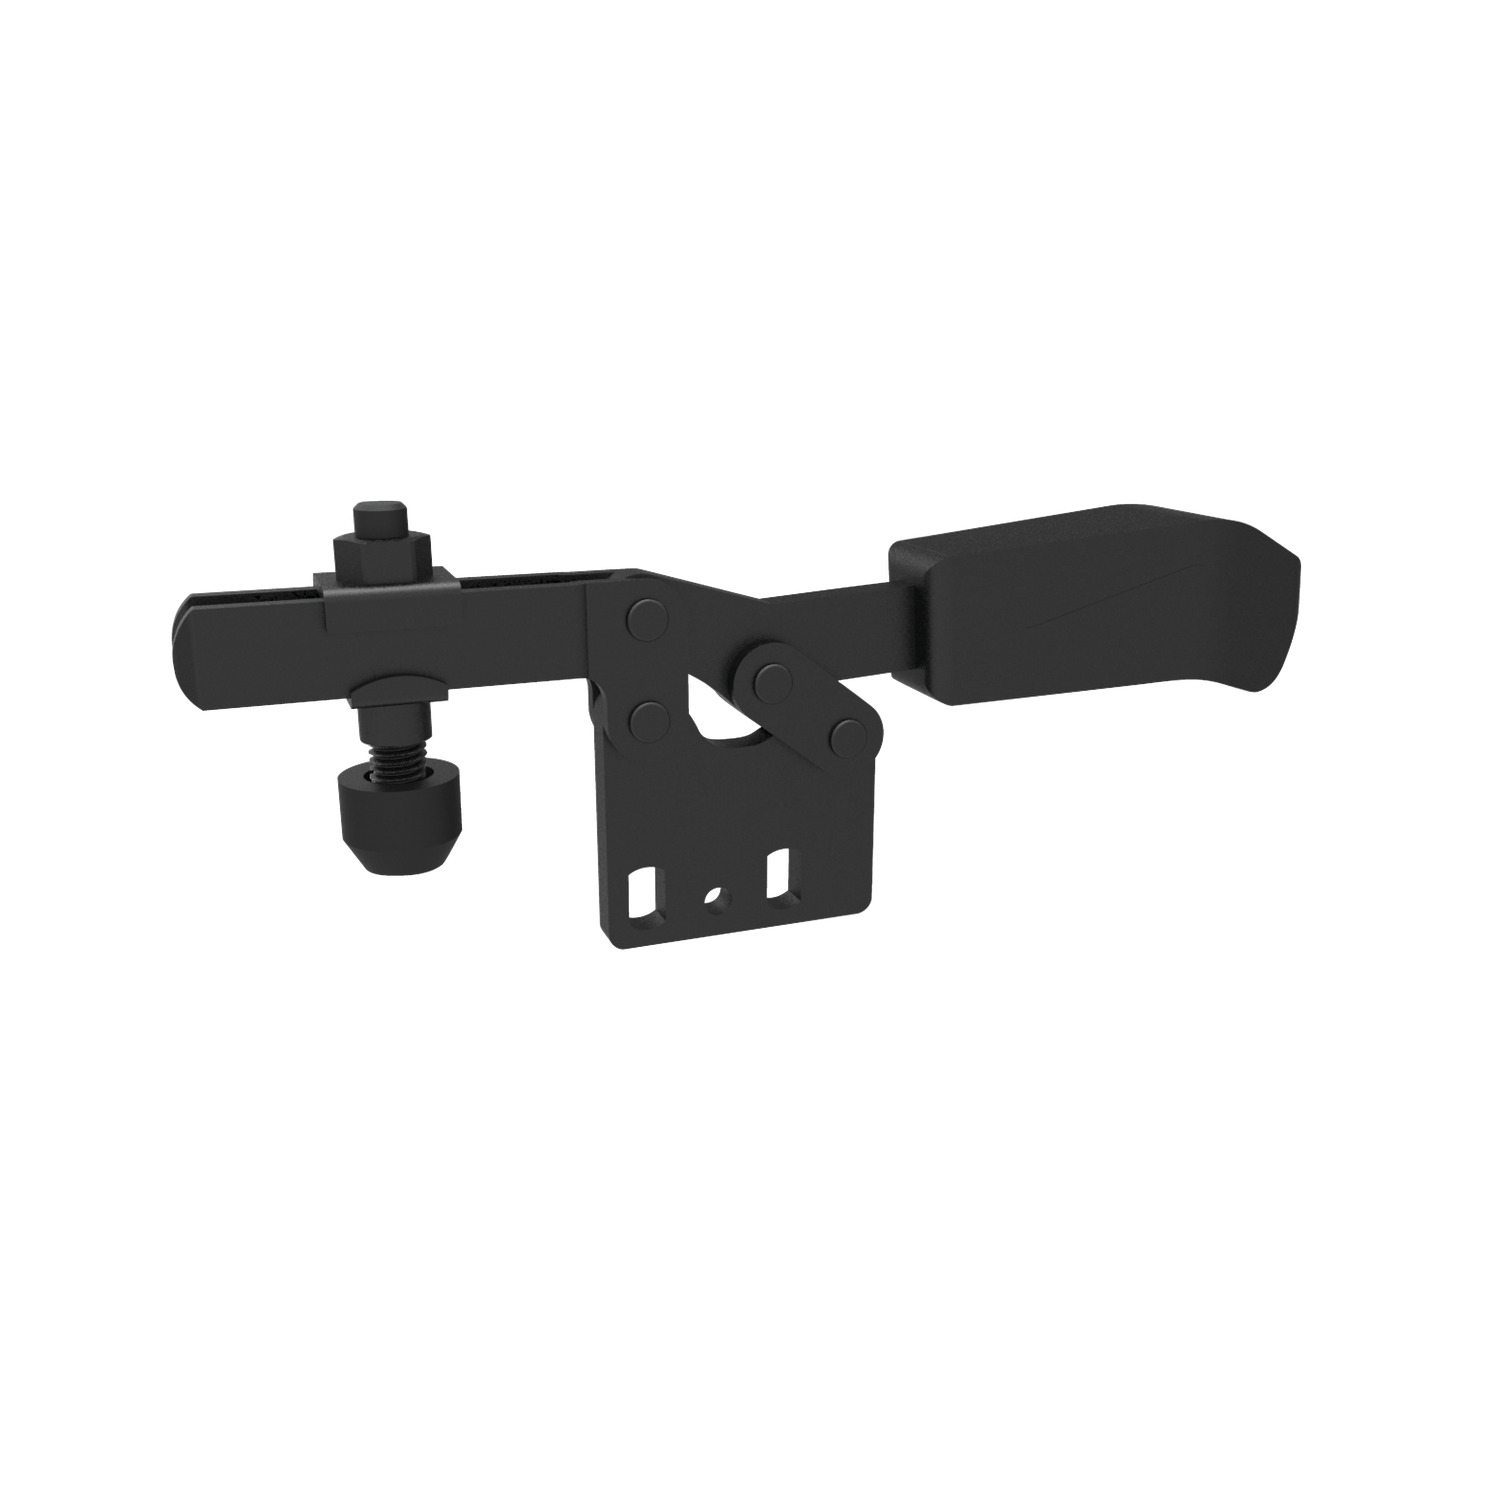 Product 41050.2, Horizontal Acting Toggle Clamps black - open arm - vertical base / 